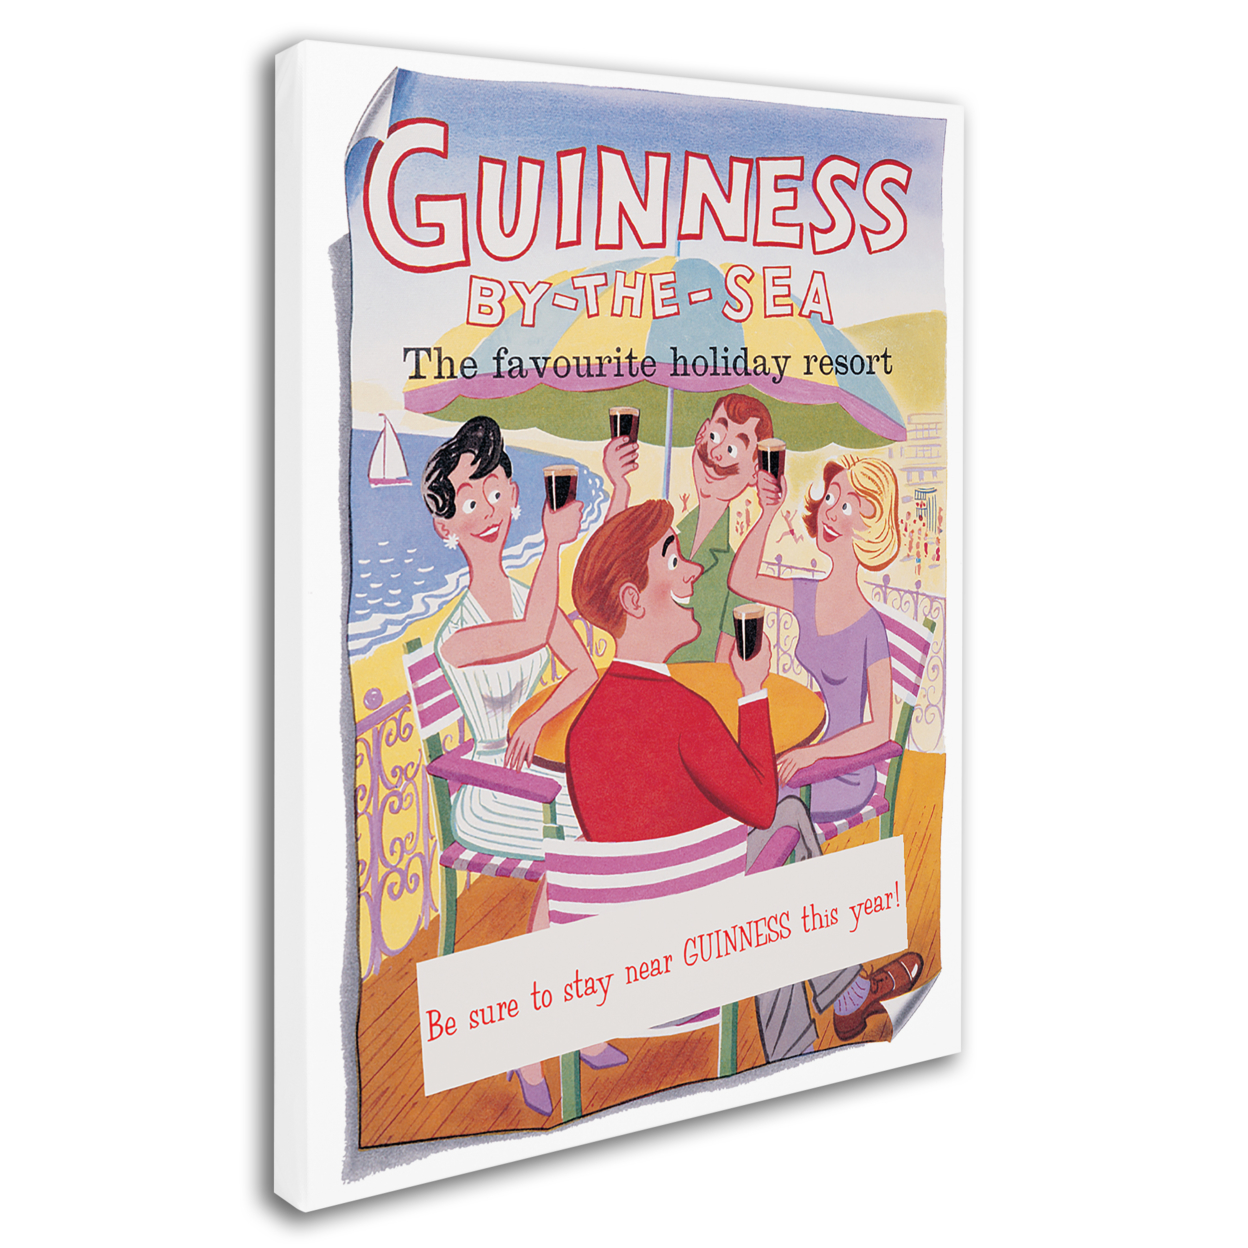 Guinness Brewery 'Guinness By The Sea' 14 X 19 Canvas Art